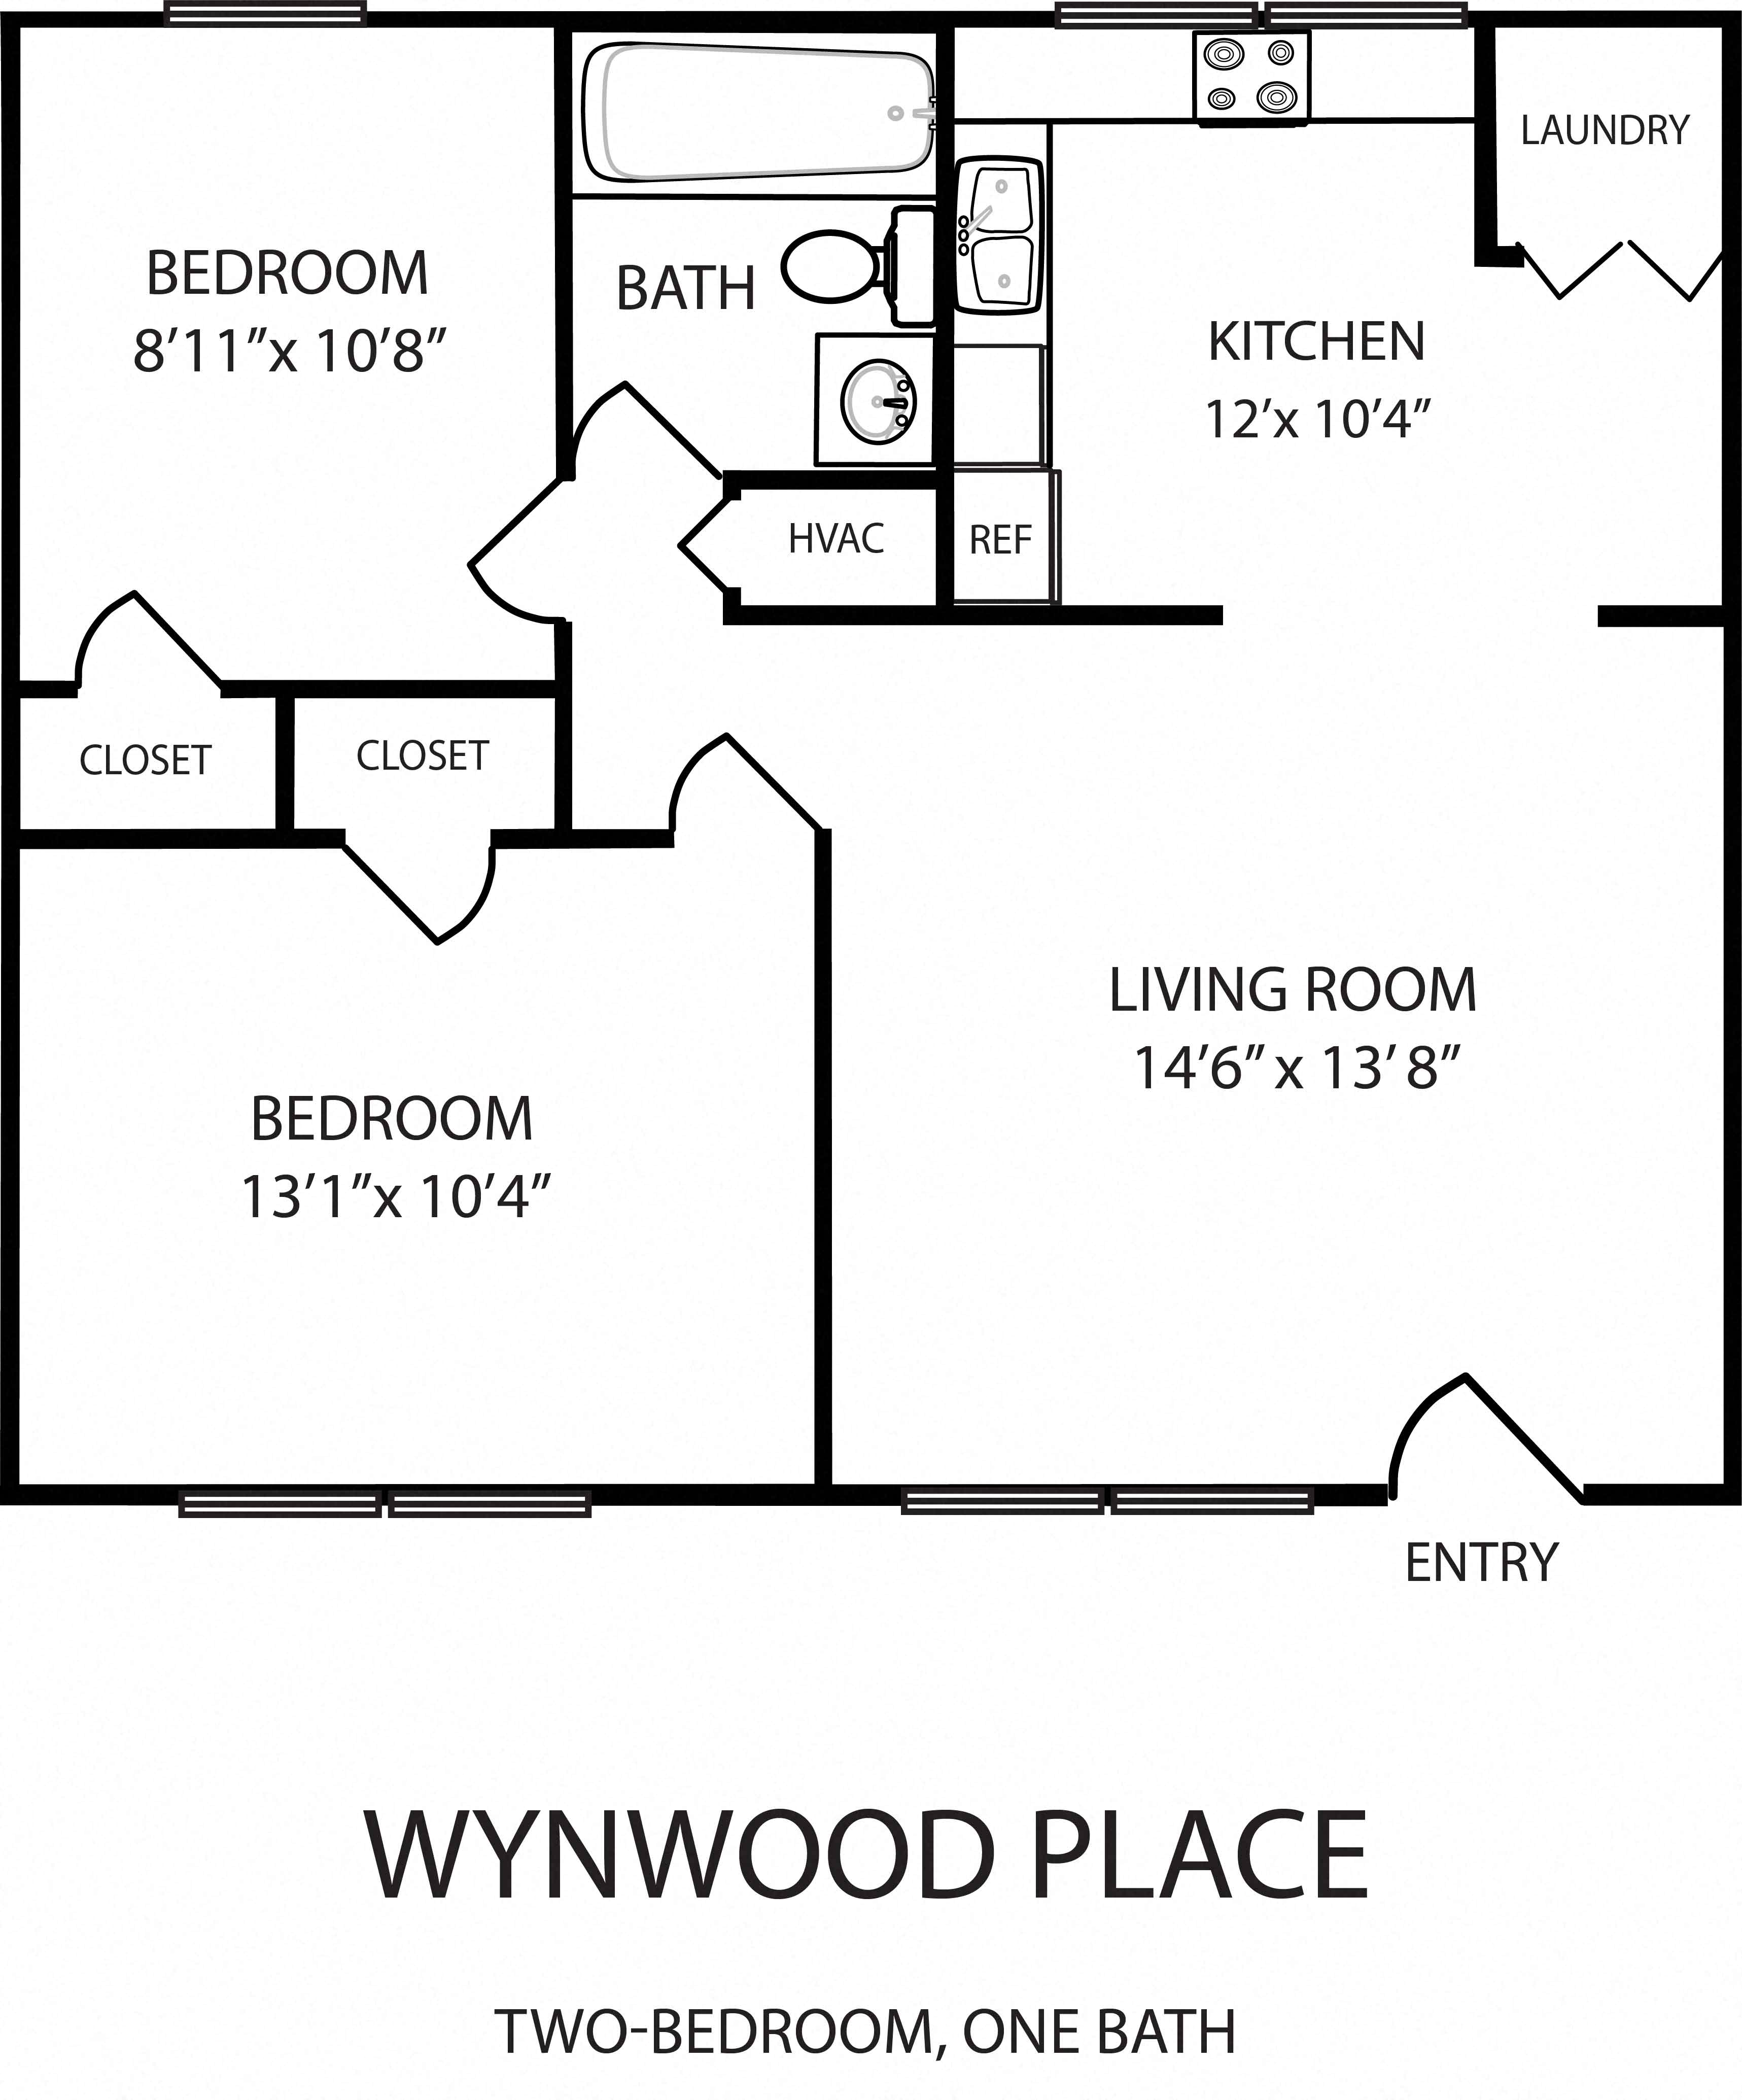 Floor Plans of Wynwood Place Estates in Raleigh, NC